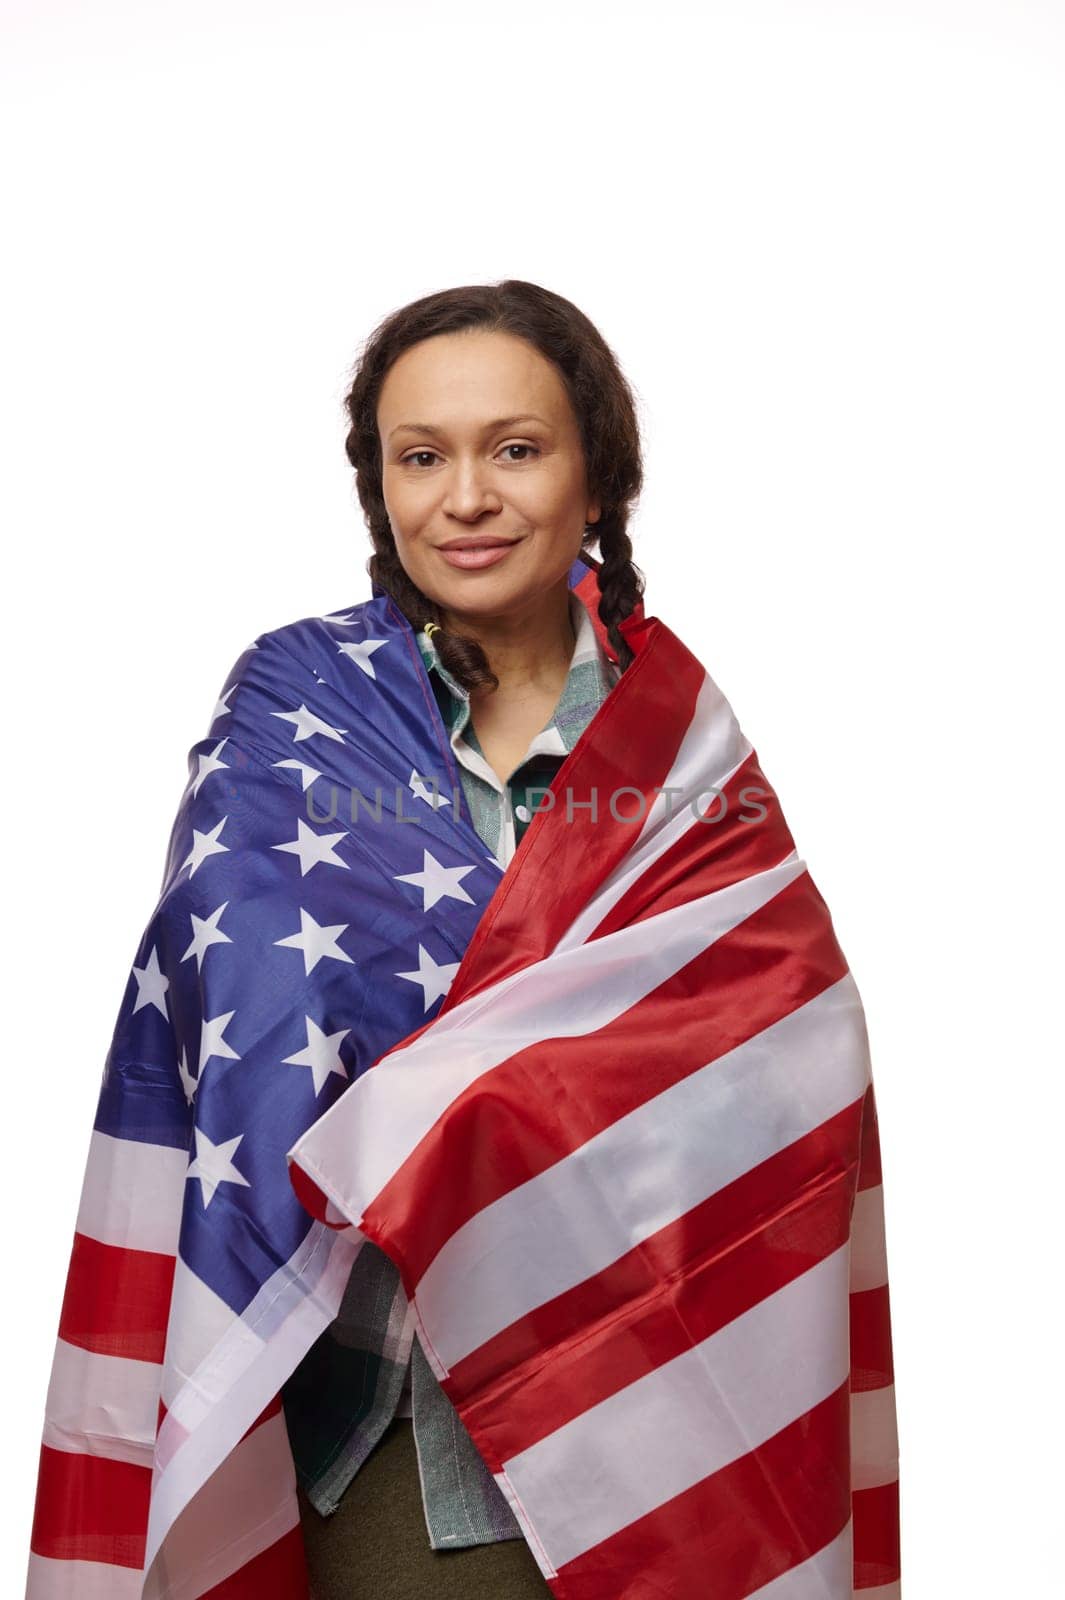 Proud multinational woman wrapped in the flag of the United States of America, looking at camera on isolated white background, proud to be American citizen. Copy ad space. July 4th. Independence Day